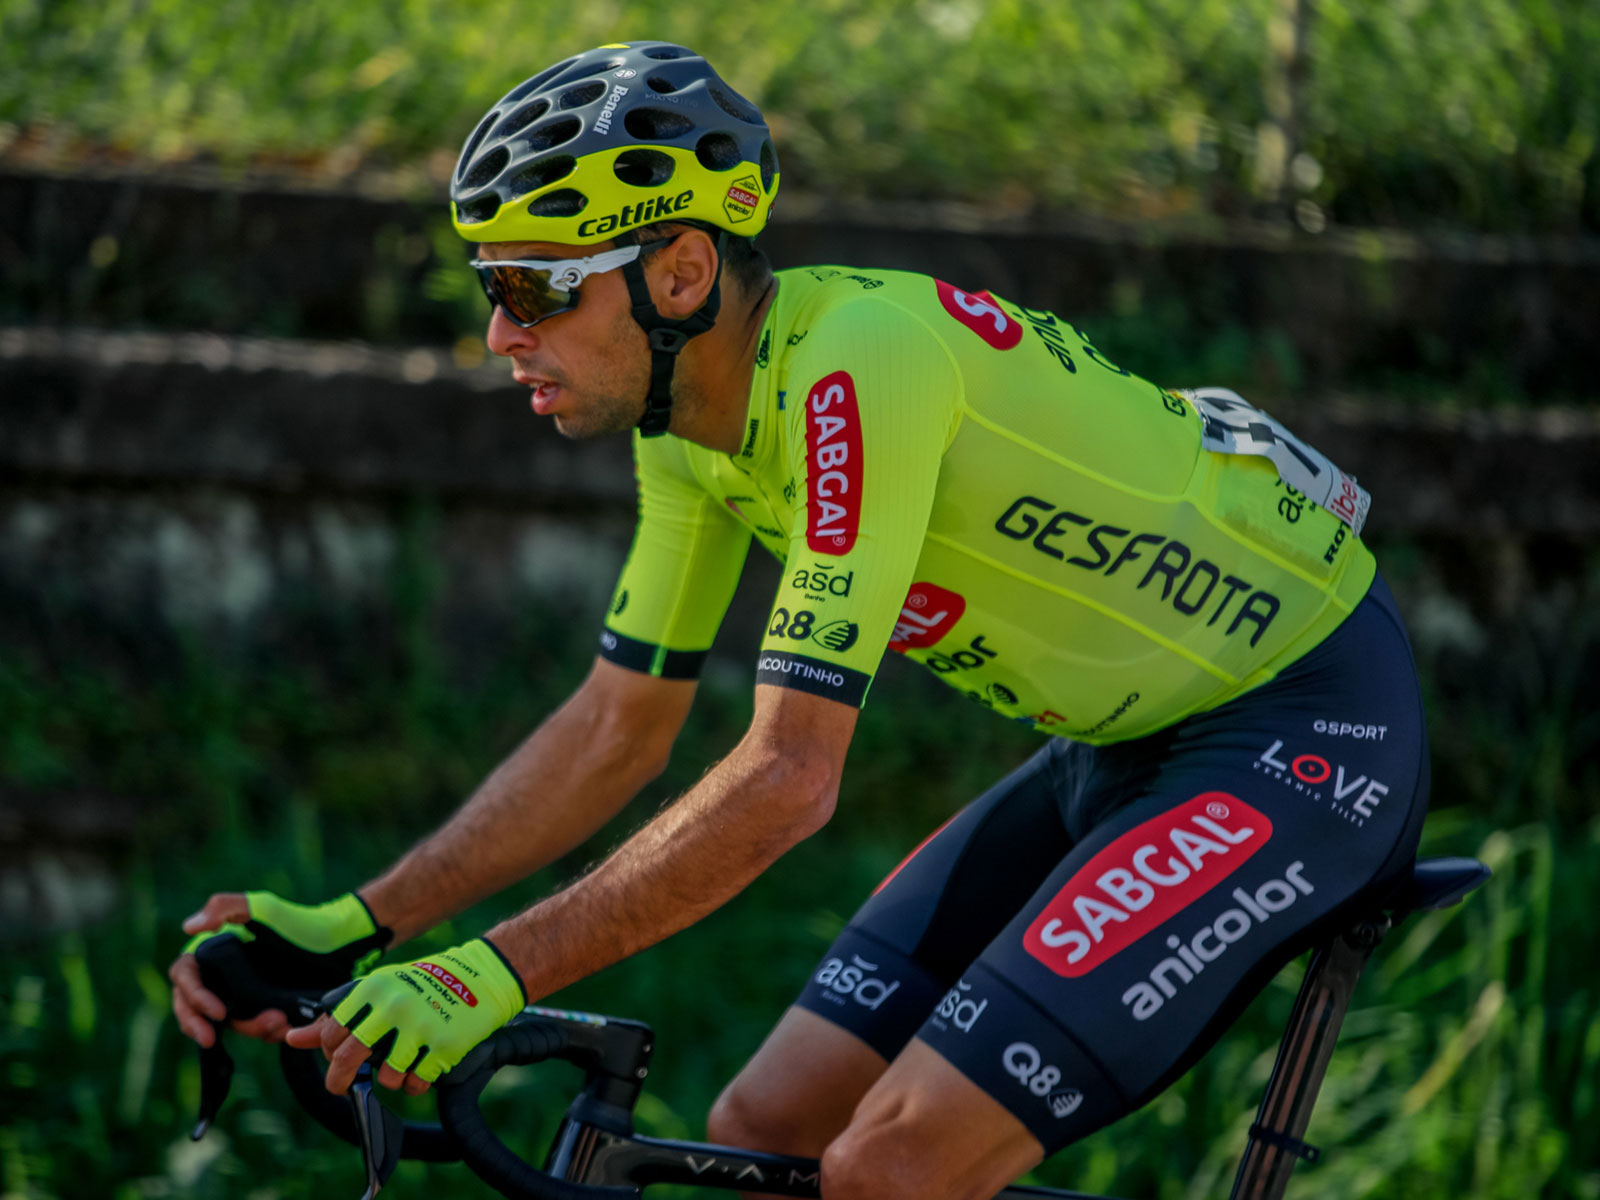 GSPORT JUMPS TO PORTUGAL WITH THE SABGAL ANICOLOR CYCLING TEAM